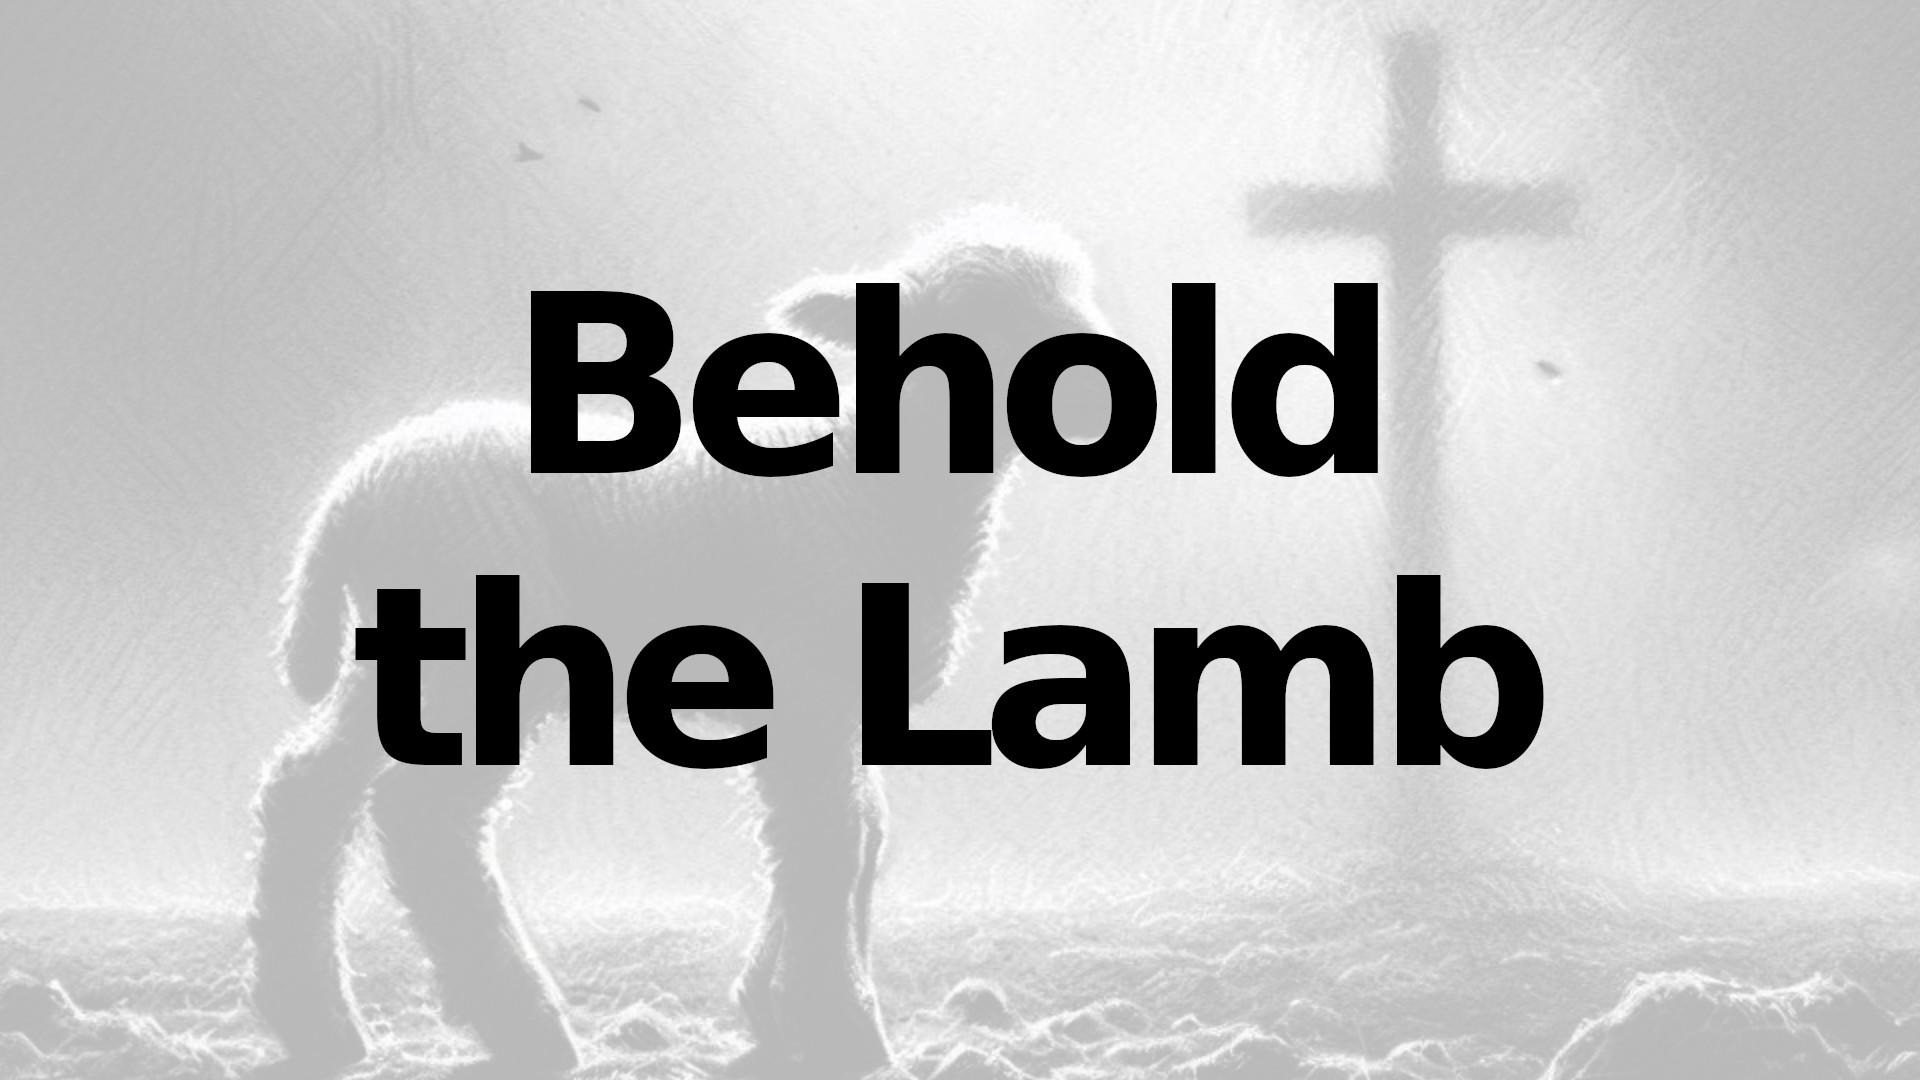 Starting October 2024 Behold the lamb